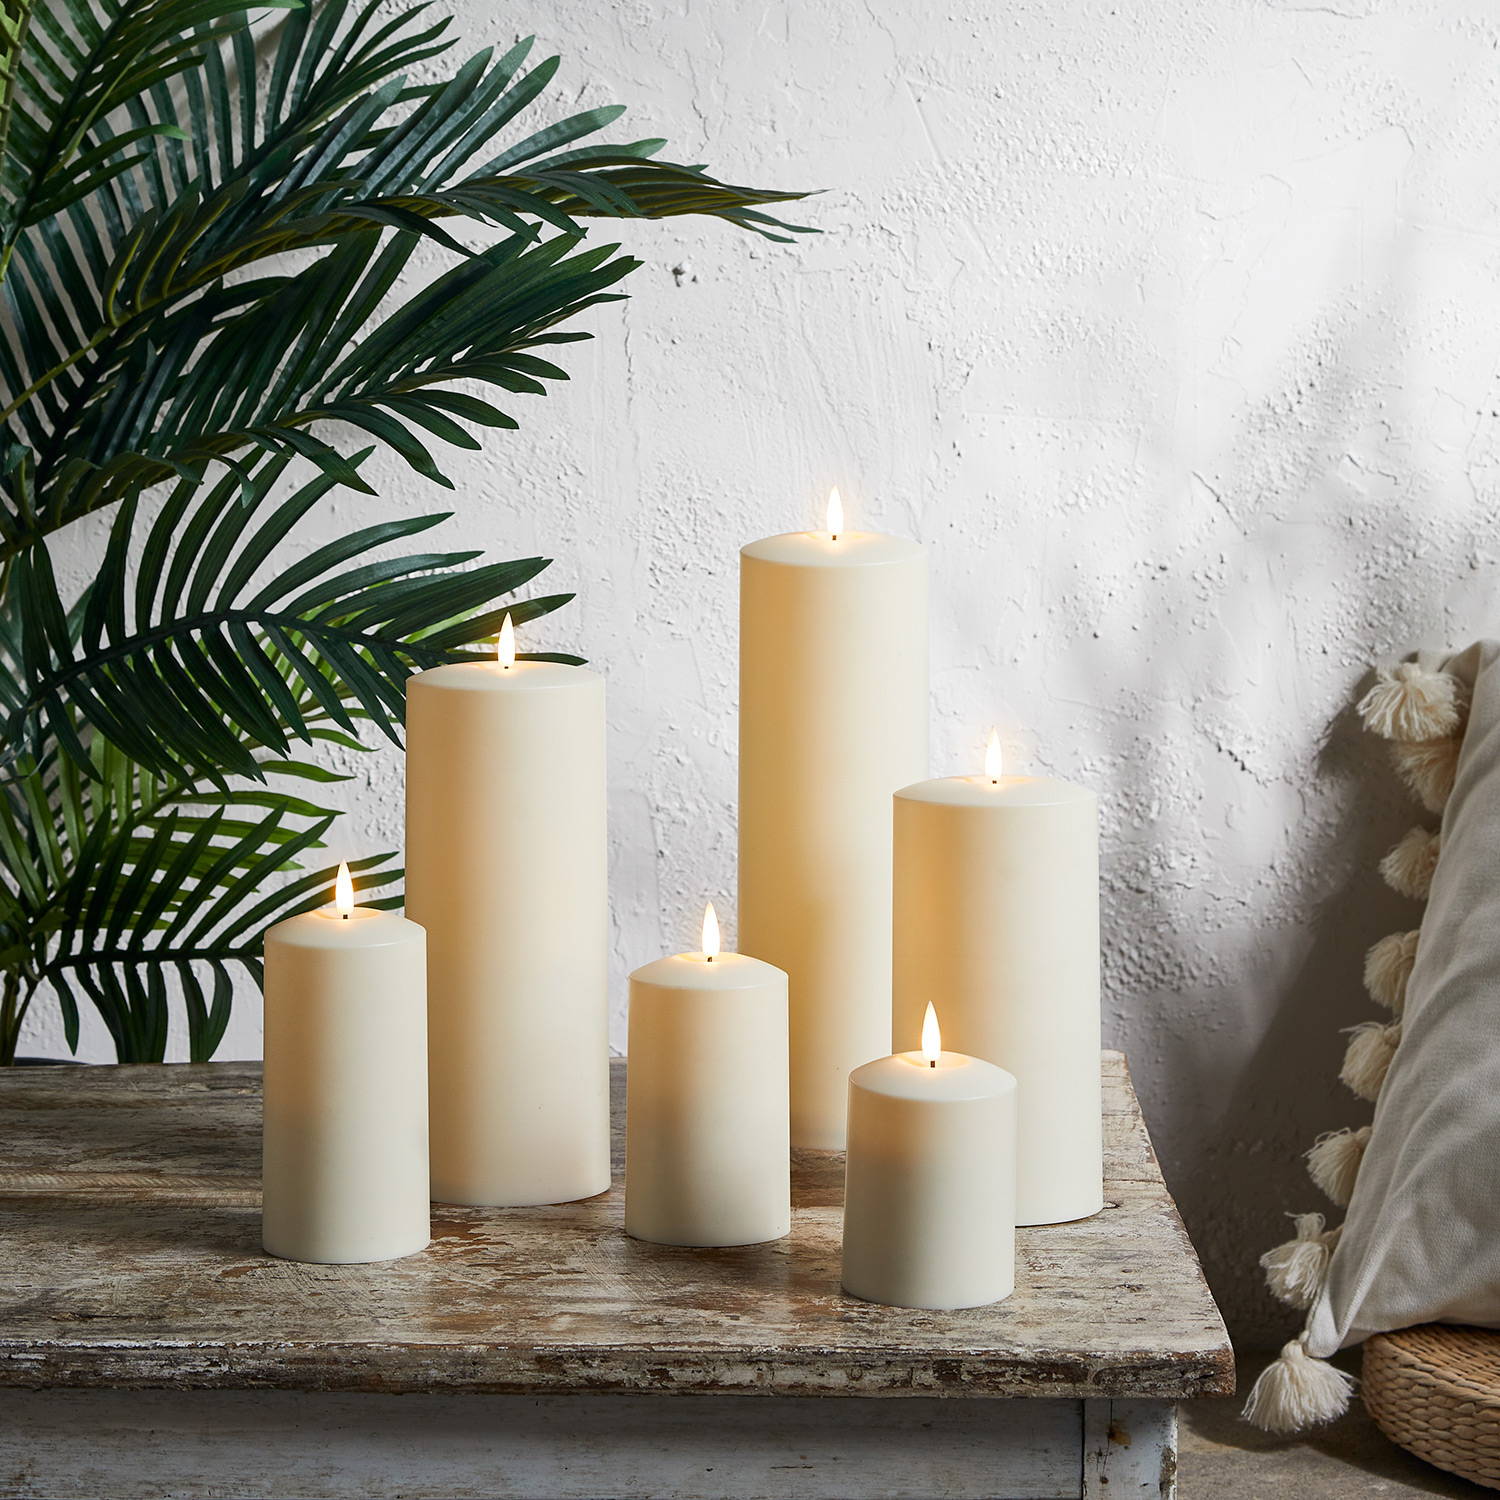 A collection of realistic TruGlow battery candlescandles sat on a table with some green foliage behind